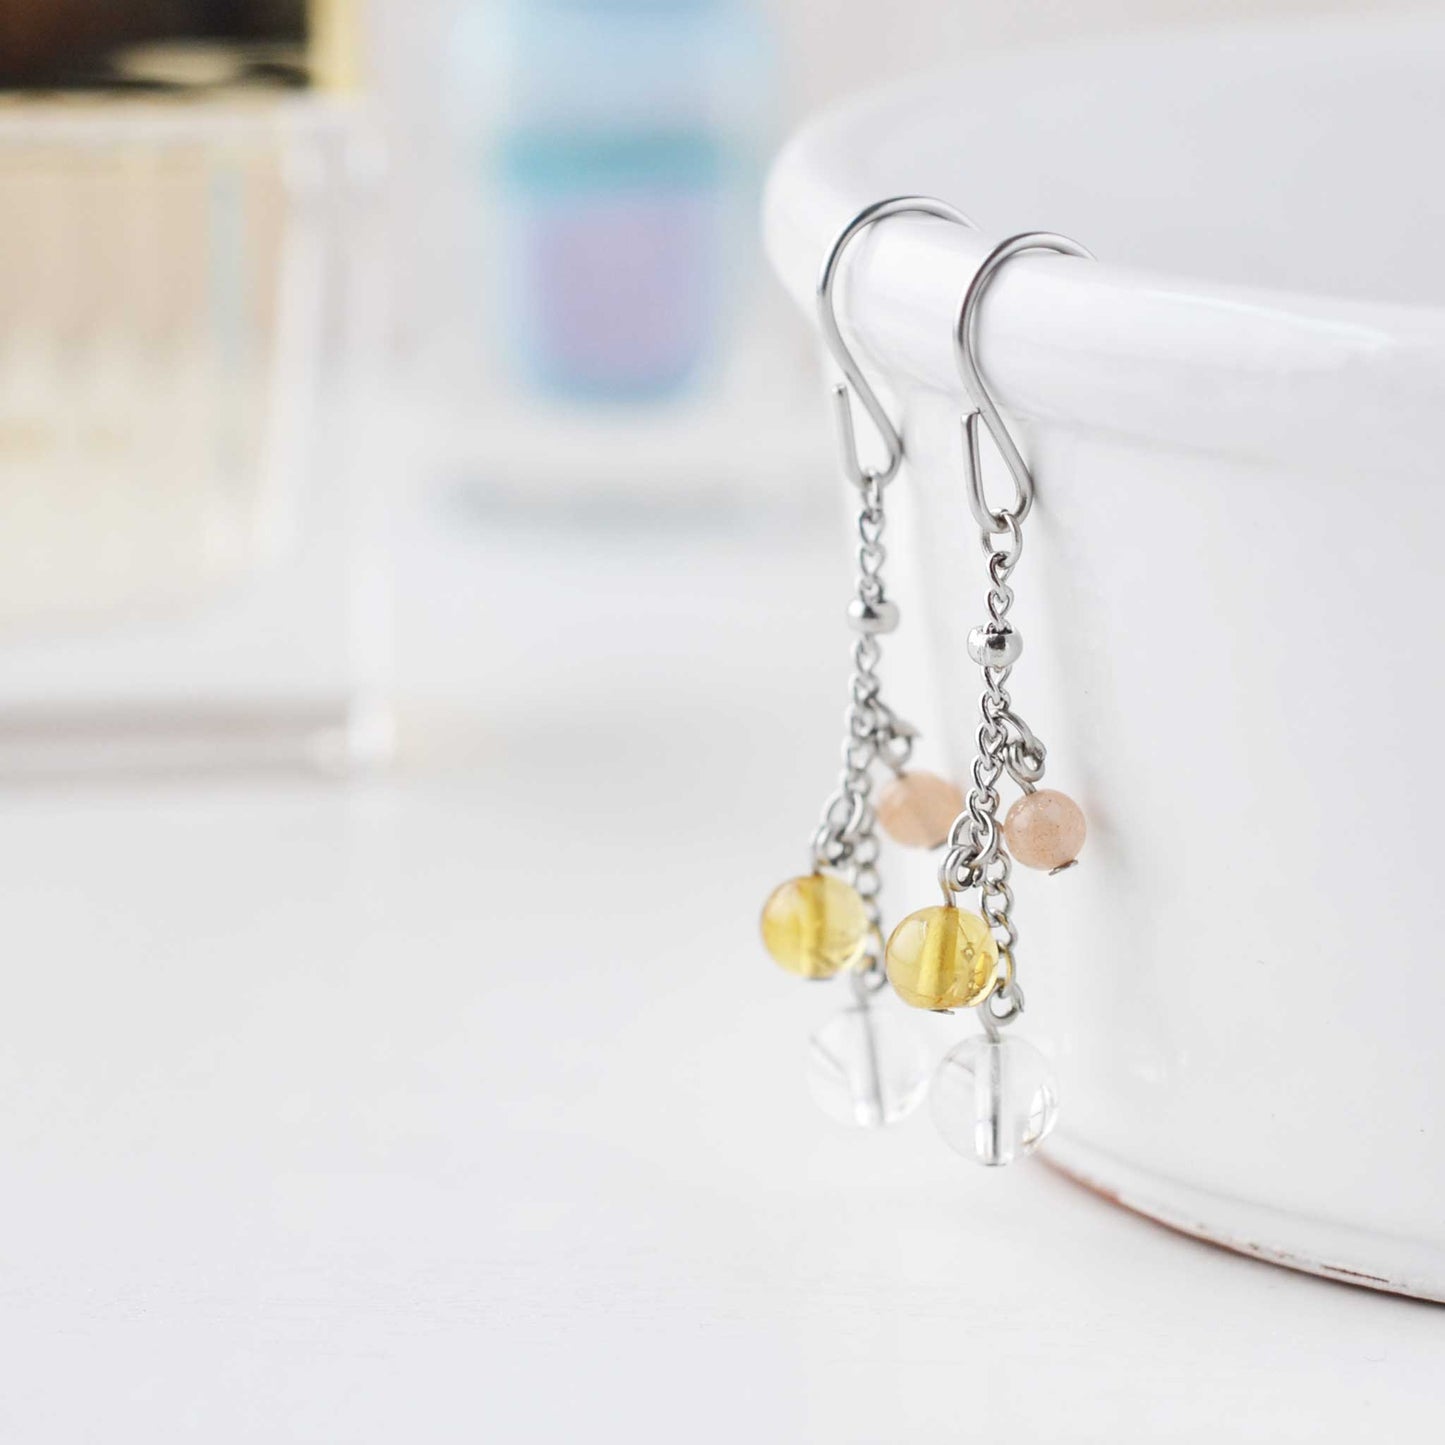 Yellow gemstone drop earrings hanging from white dish against soft focud background